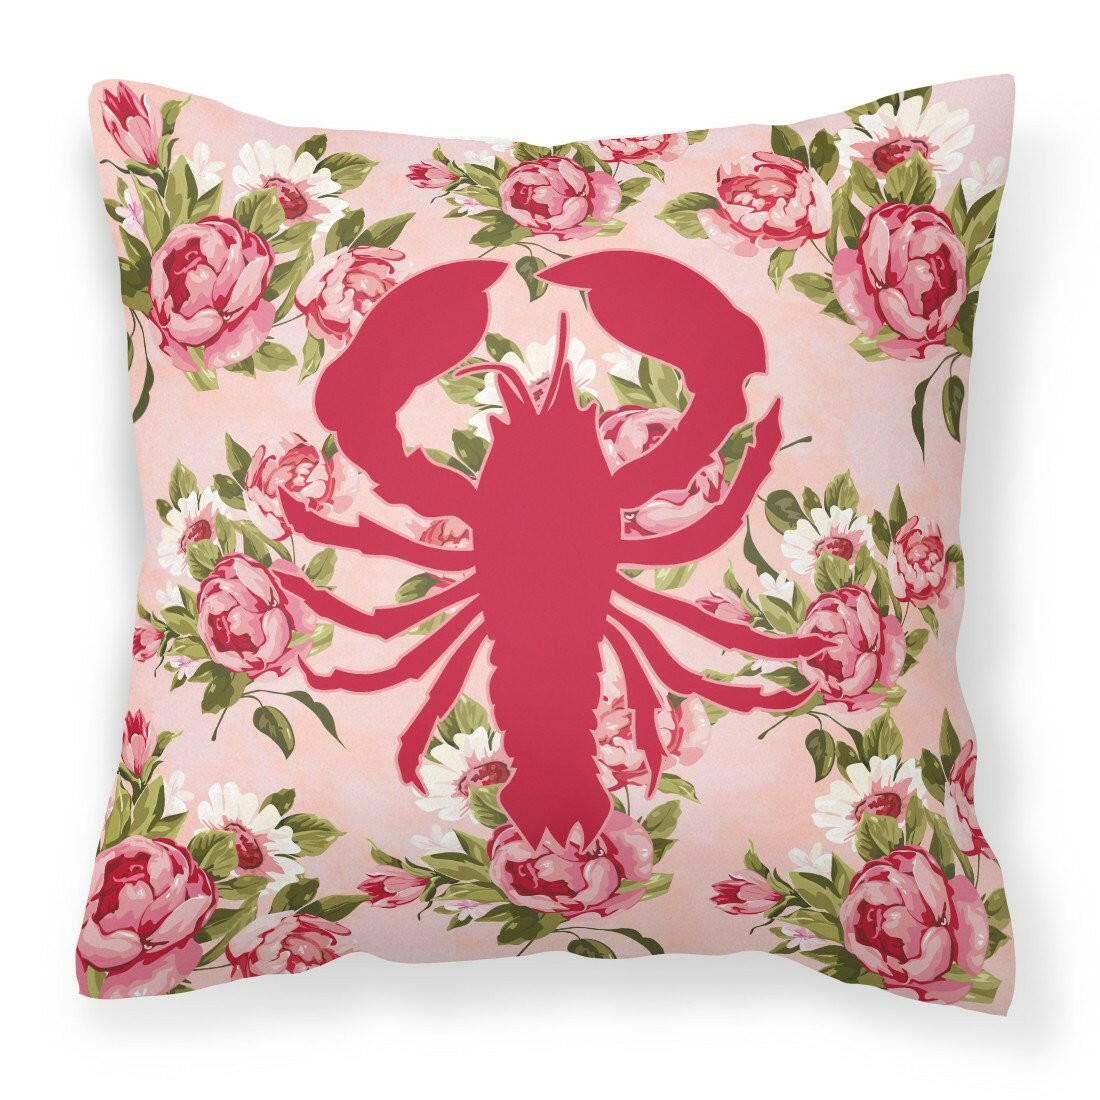 Lobster Shabby Chic Pink Roses  Fabric Decorative Pillow BB1015-RS-PK-PW1414 - the-store.com